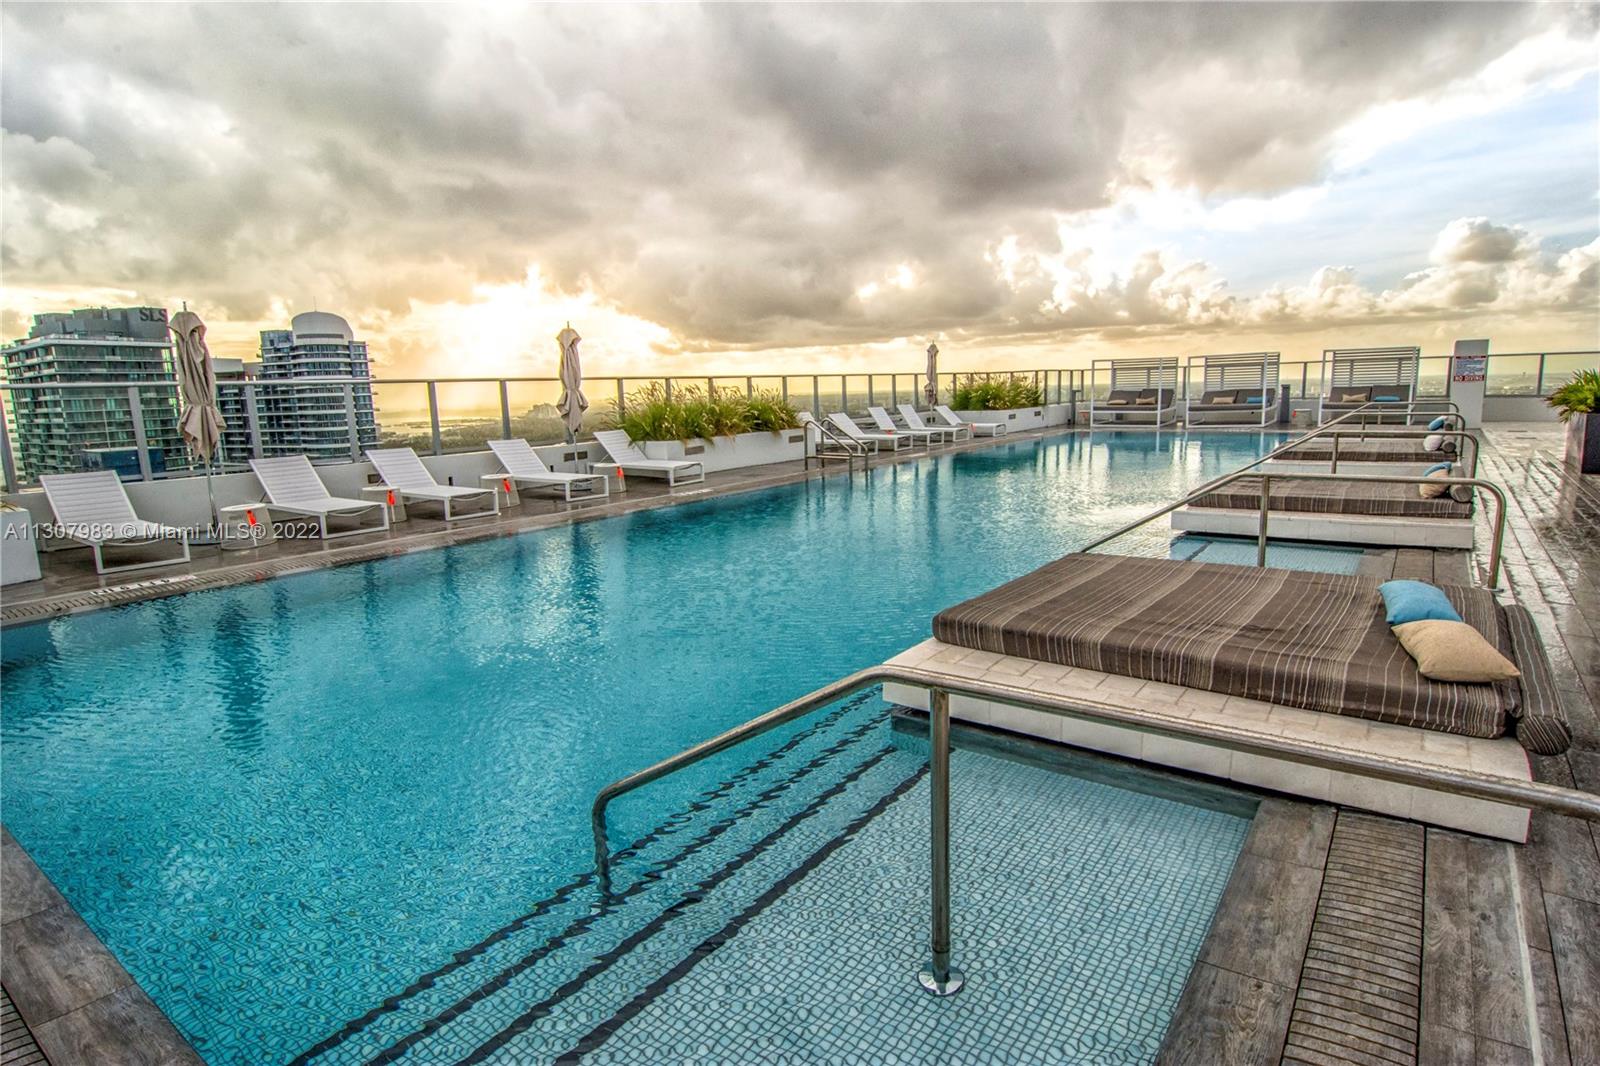 Superb Unit in the amazing building of 1010 Brickell, featuring 1 Bedroom, 1 converted Den so you'll have 2 bedrooms with phenomenal skyline views, full range of amenities to enjoy from heated pool, Kids Gym, ping pong tables, social room with virtual golf simulator, plasma TV, billiard, pool, gym, yoga room, basketball, tennis and running track as well as sauna facilities.